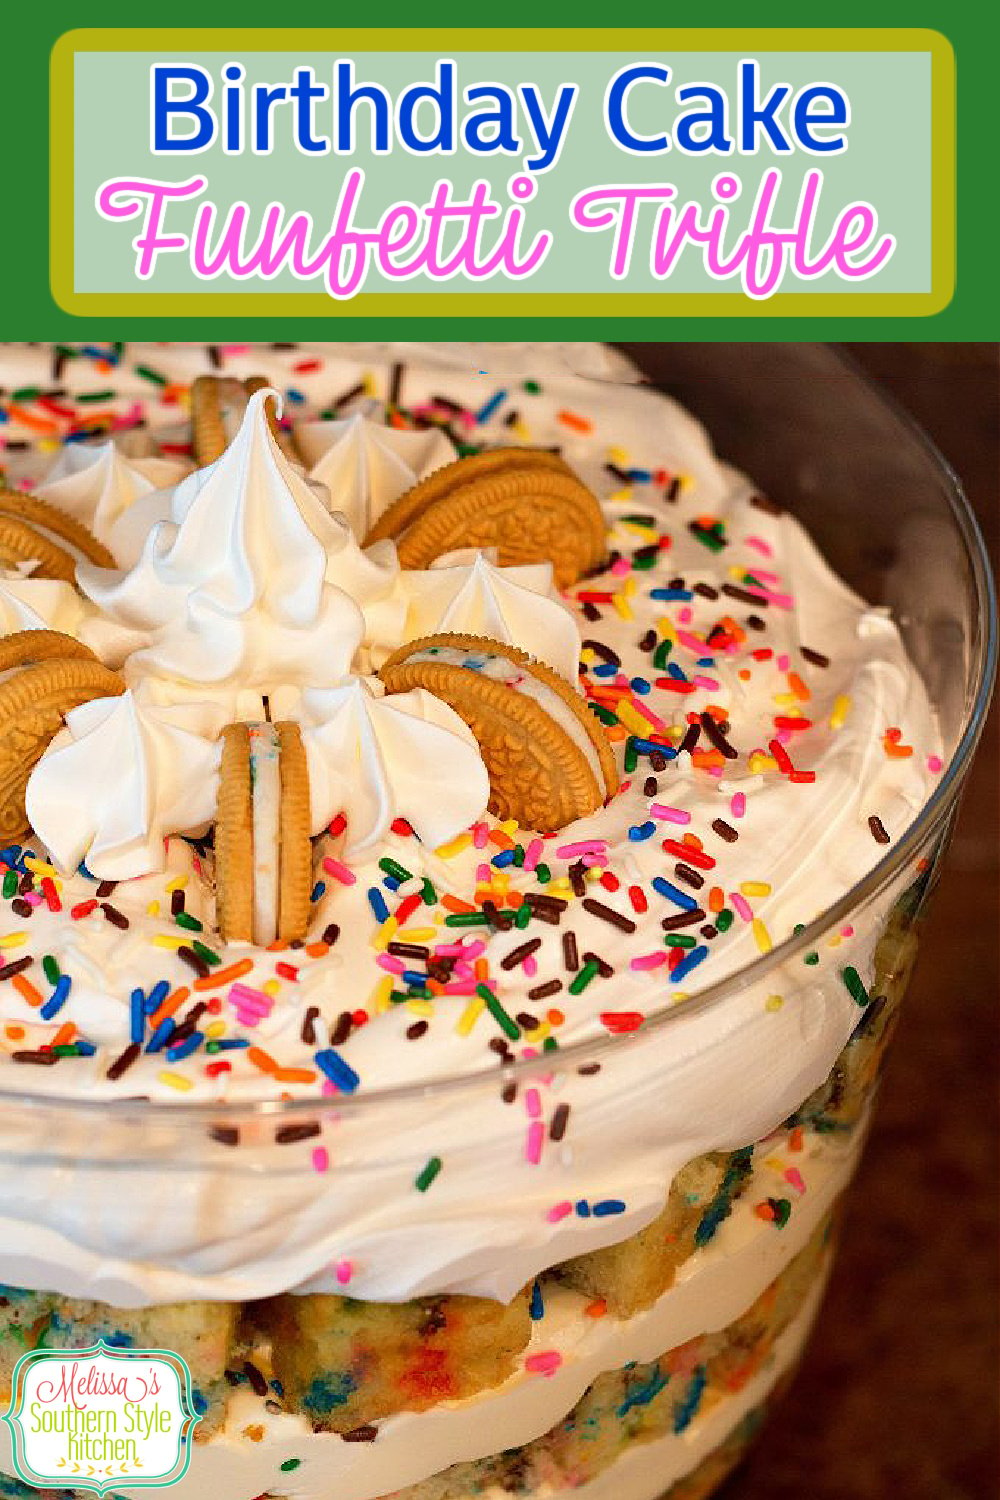 This colorful and delicious Birthday Cake Funfetti Trifle is the perfect excuse to party like it's your birthday any day of the year #funfettitrifle #funfetti #triflerecipes #southernrecipes #birthdaycake #partyfood #cakes #cakerecipes